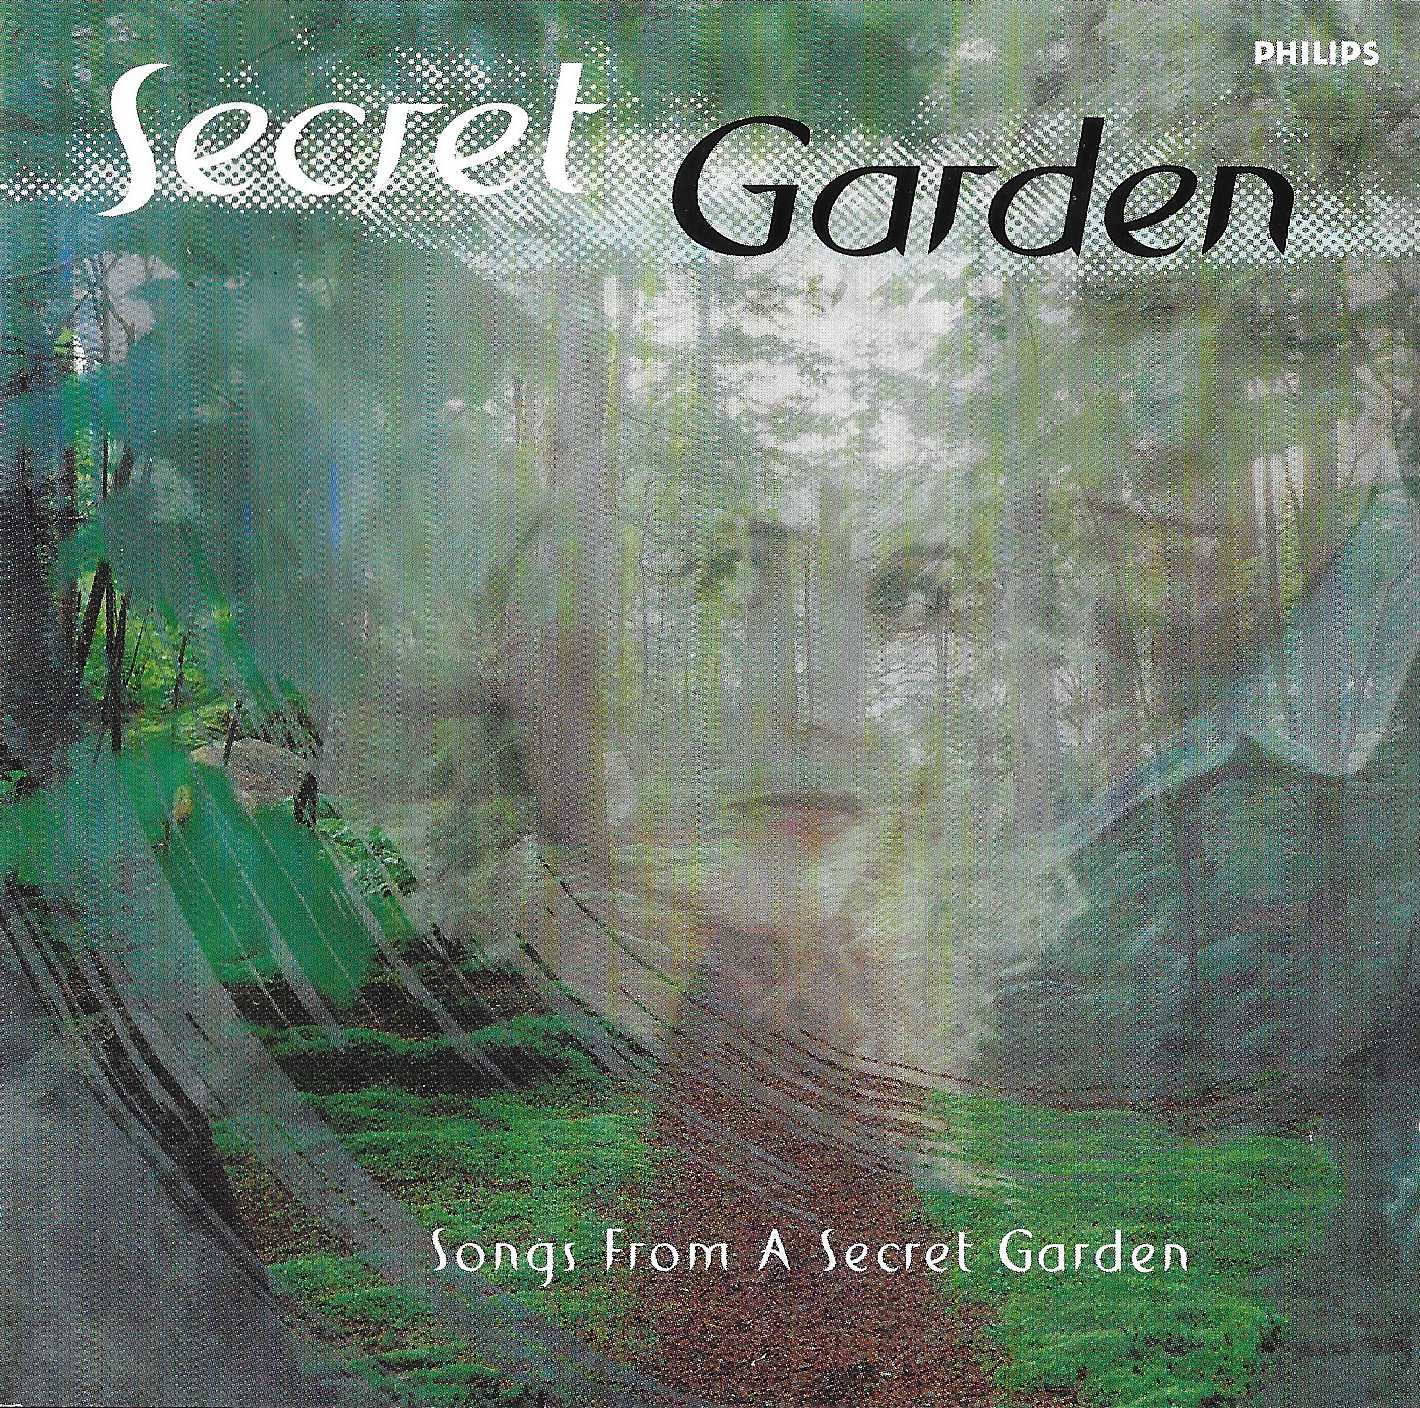 Picture of 528230 - 2 11 Songs from a secret garden - Norwegian import, limited edition (Includes CDS) by artist Secret Garden 